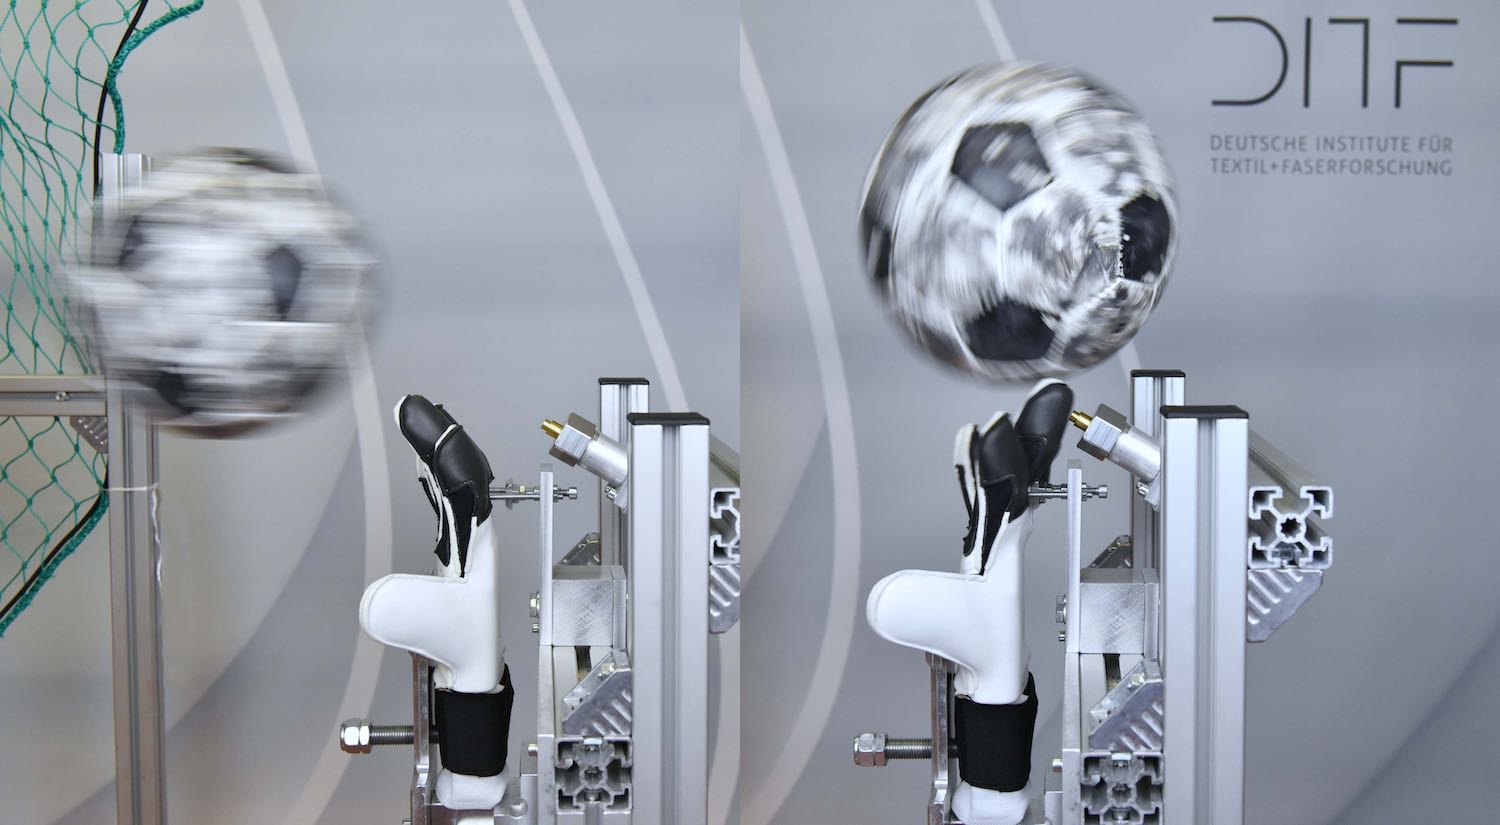 The test bench testing ball cannon shots at 20-120 kmh for the new goalkeeper’s glove developed by the German Institutes of Textile and Fiber Research Denkendorf (DITF) and project partner T1TAN GmbH. © DITF